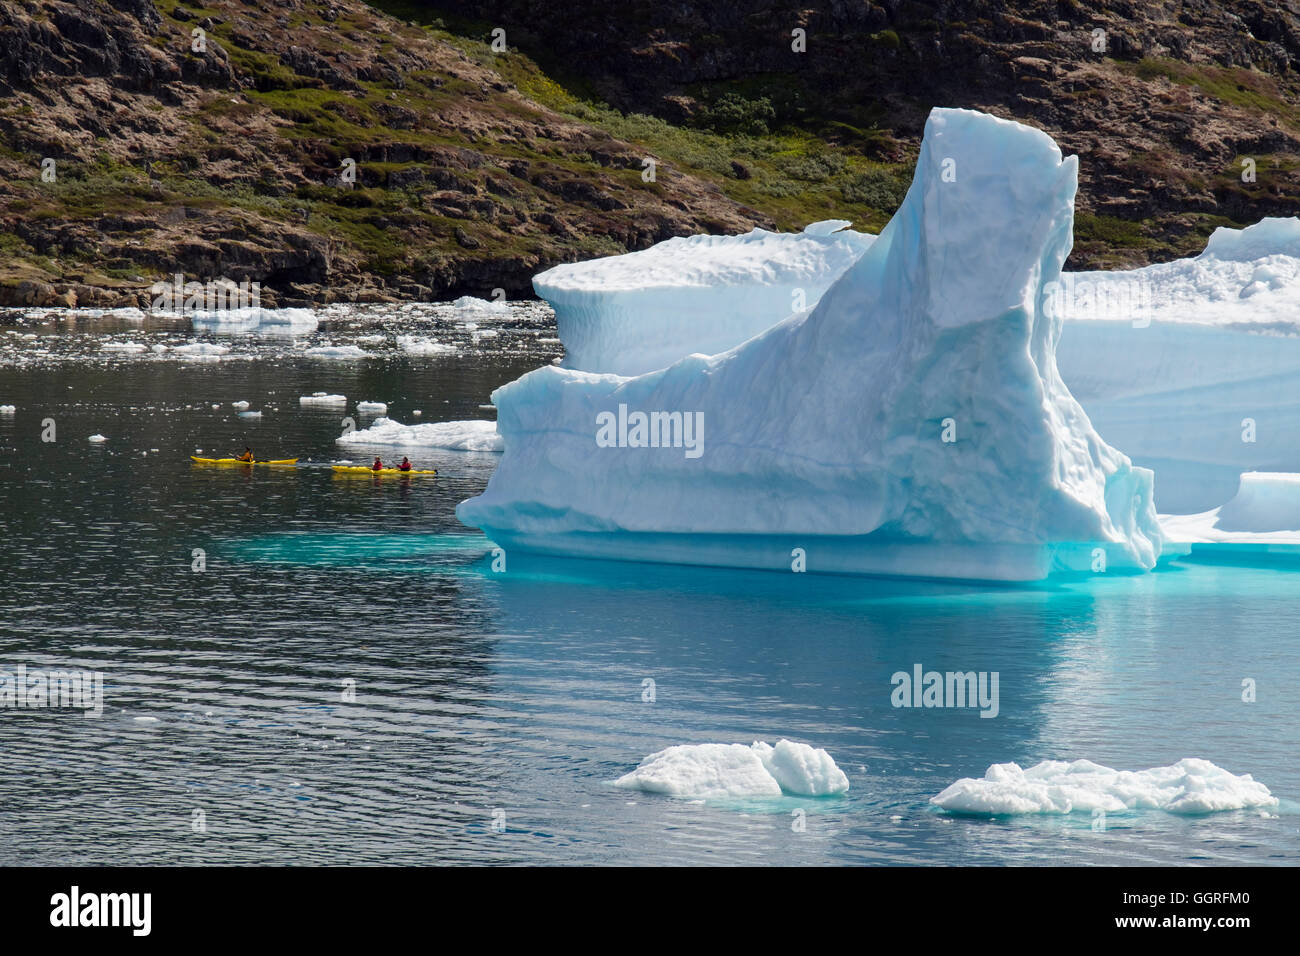 Tourists kayaking close to large Icebergs from Tunulliarfik fjord in summer. Narsaq, Kujalleq, Southern Greenland Stock Photo